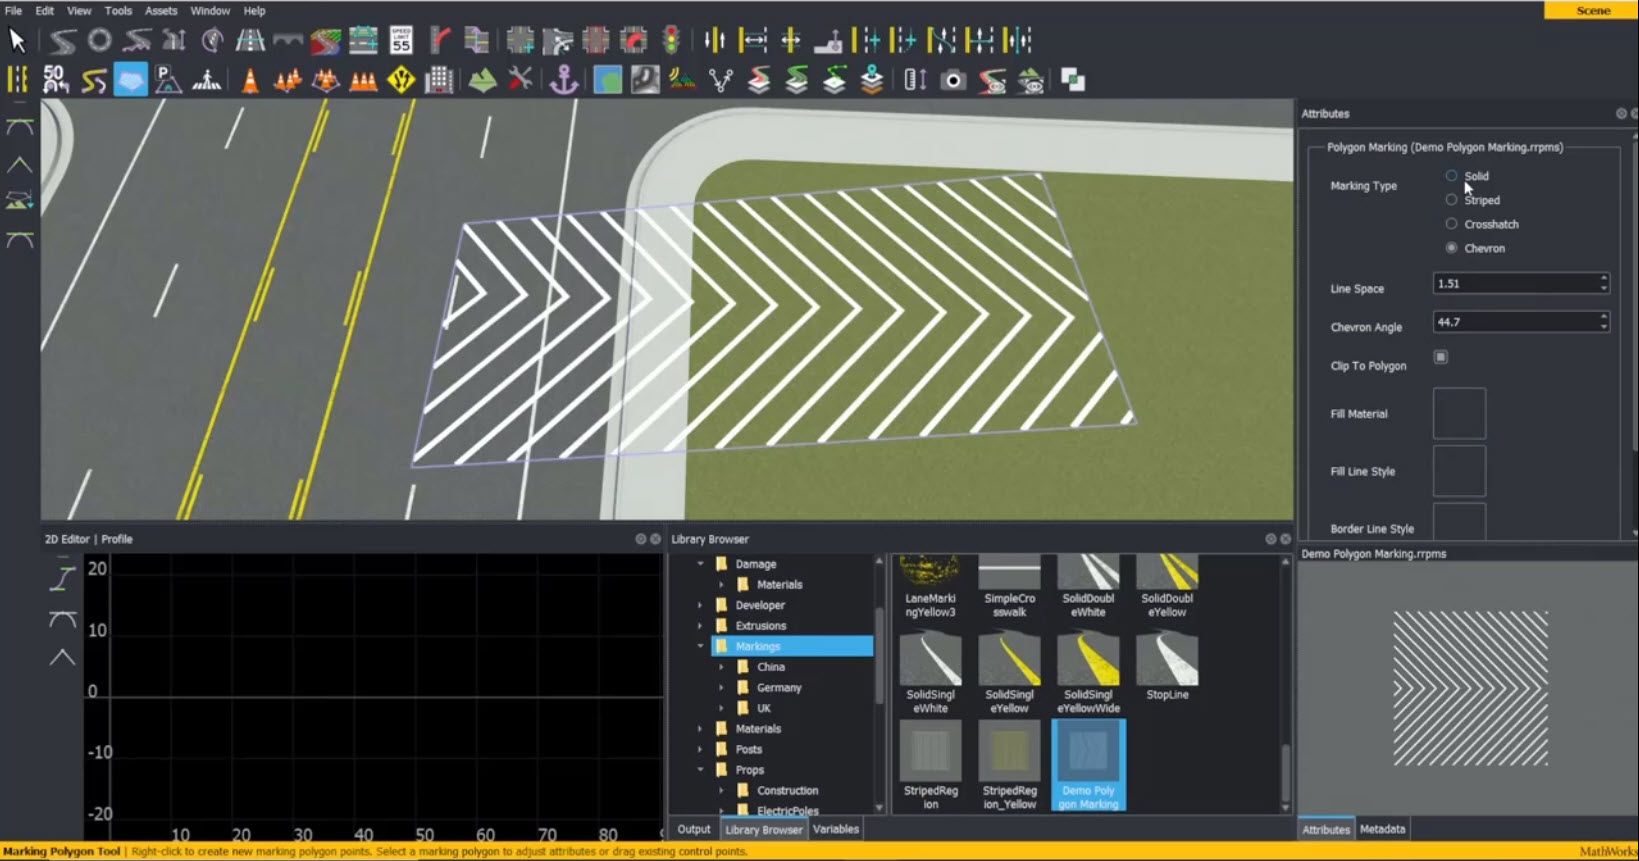 Learn how to create and edit marking polygons in RoadRunner interactive editing software.